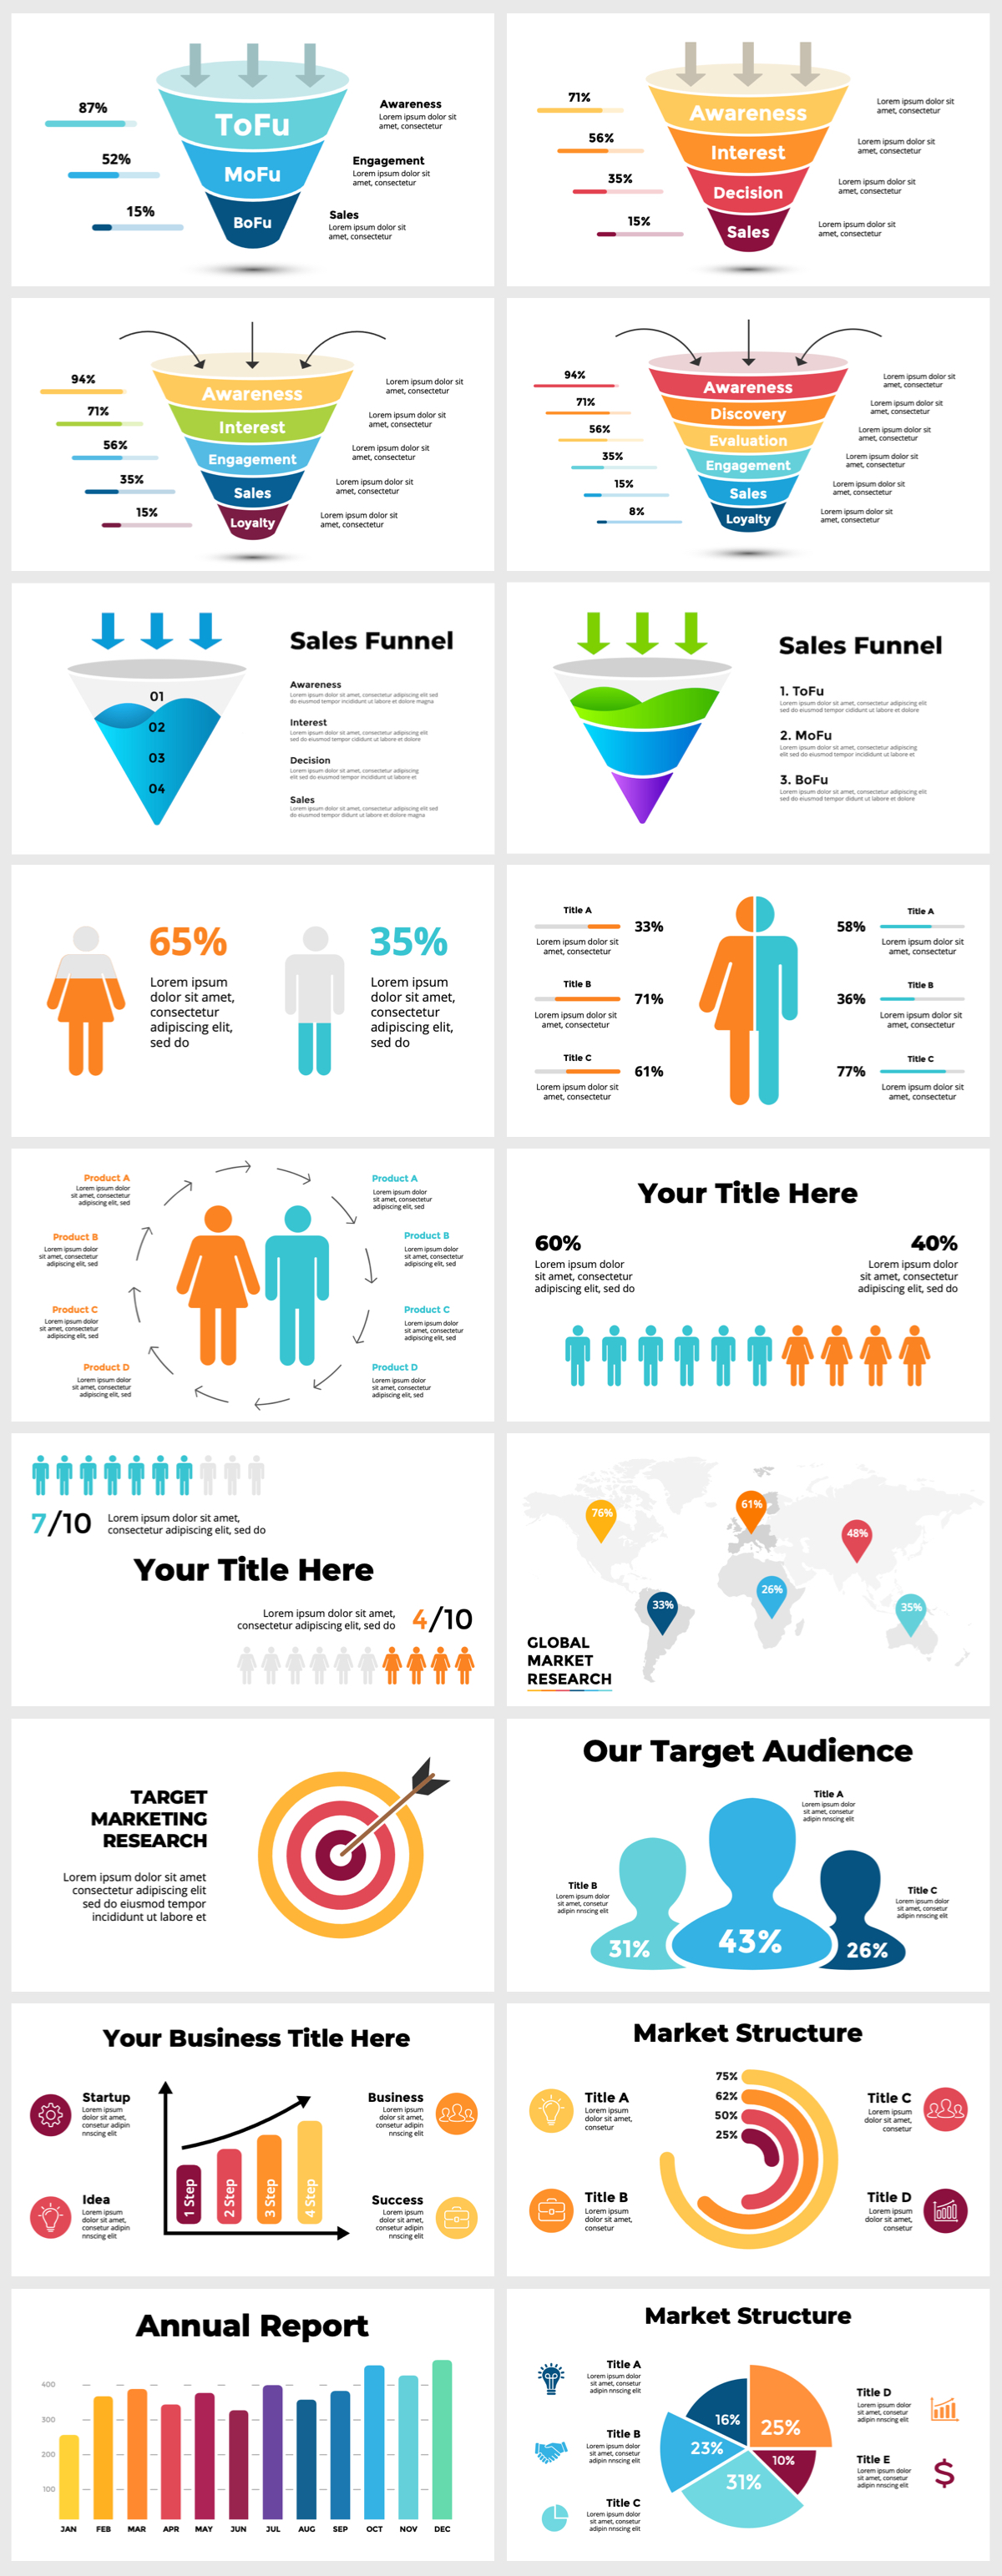 Wowly - 3500 Infographics & Presentation Templates! Updated! PowerPoint Canva Figma Sketch Ai Psd. - 146